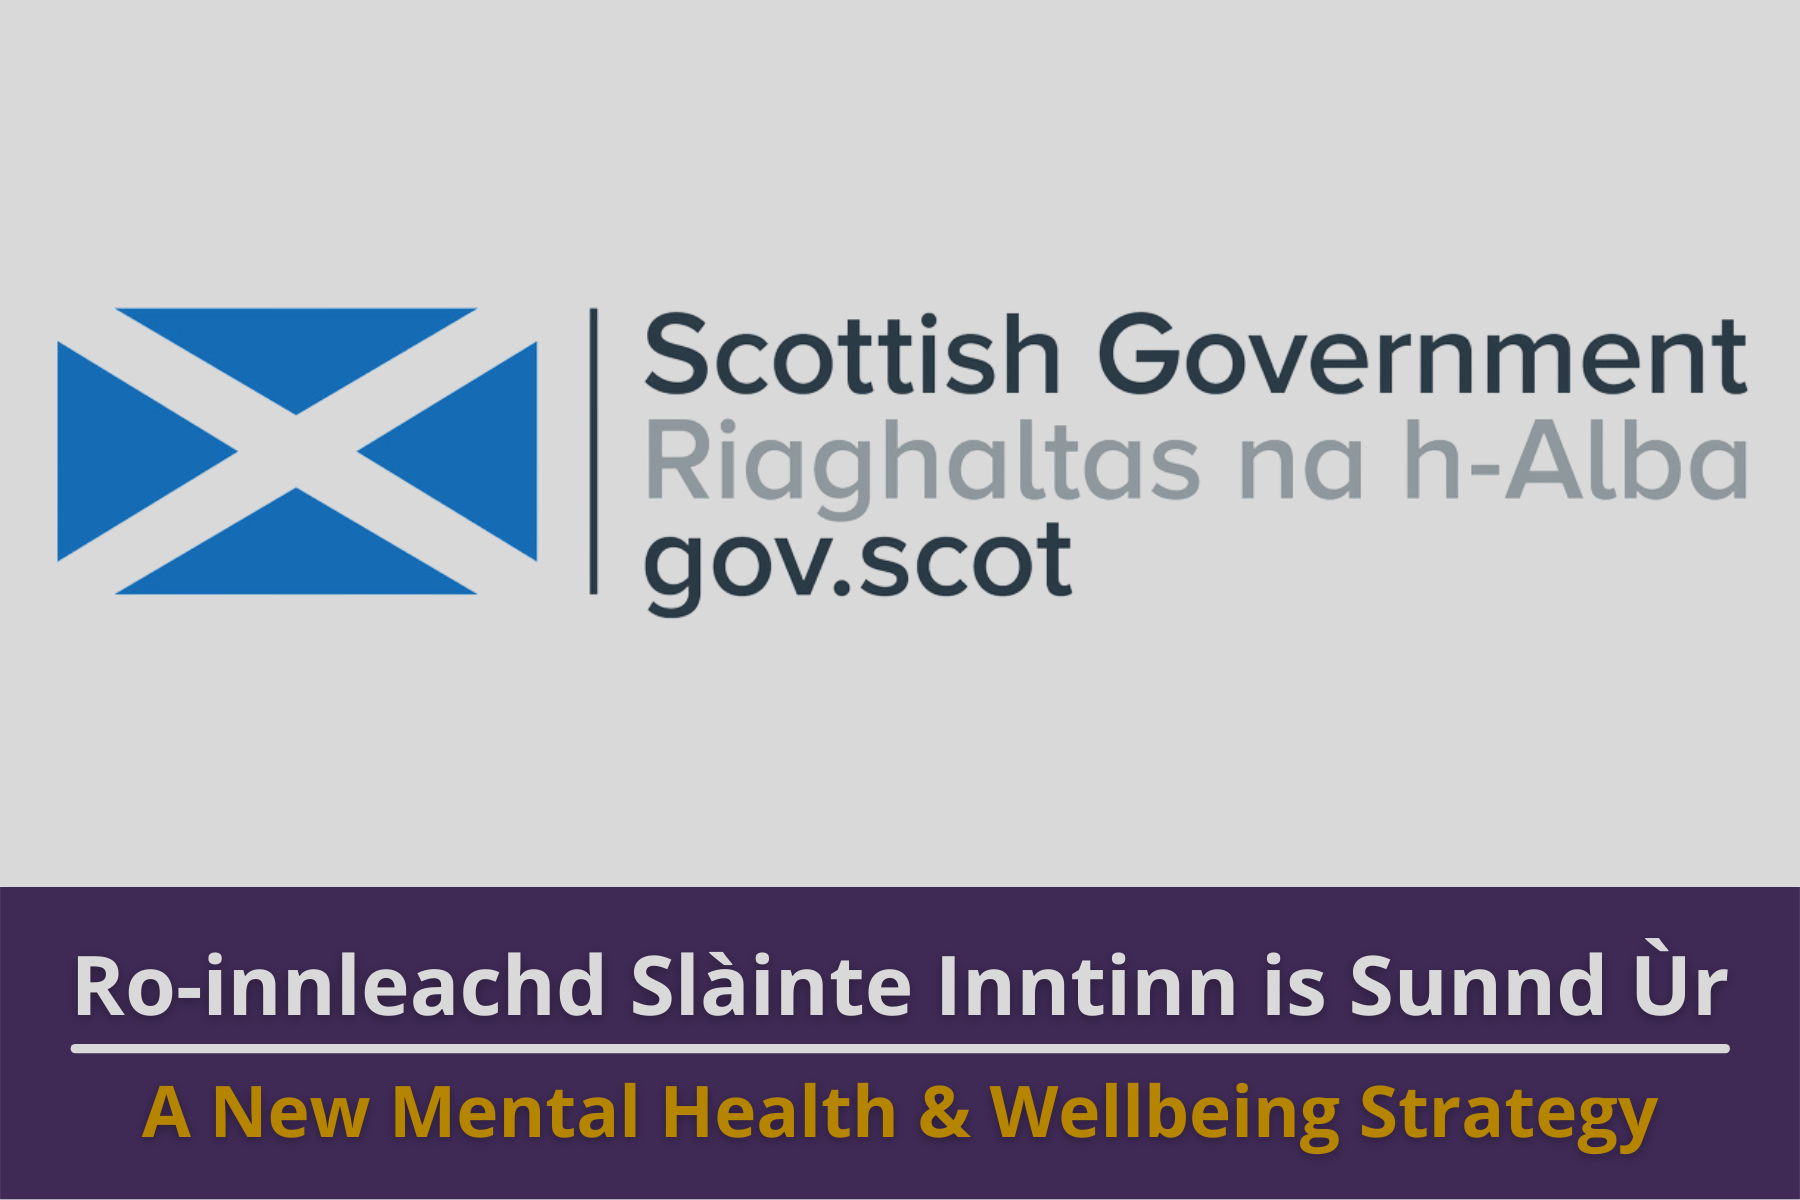 A new Mental Health and Wellbeing Strategy